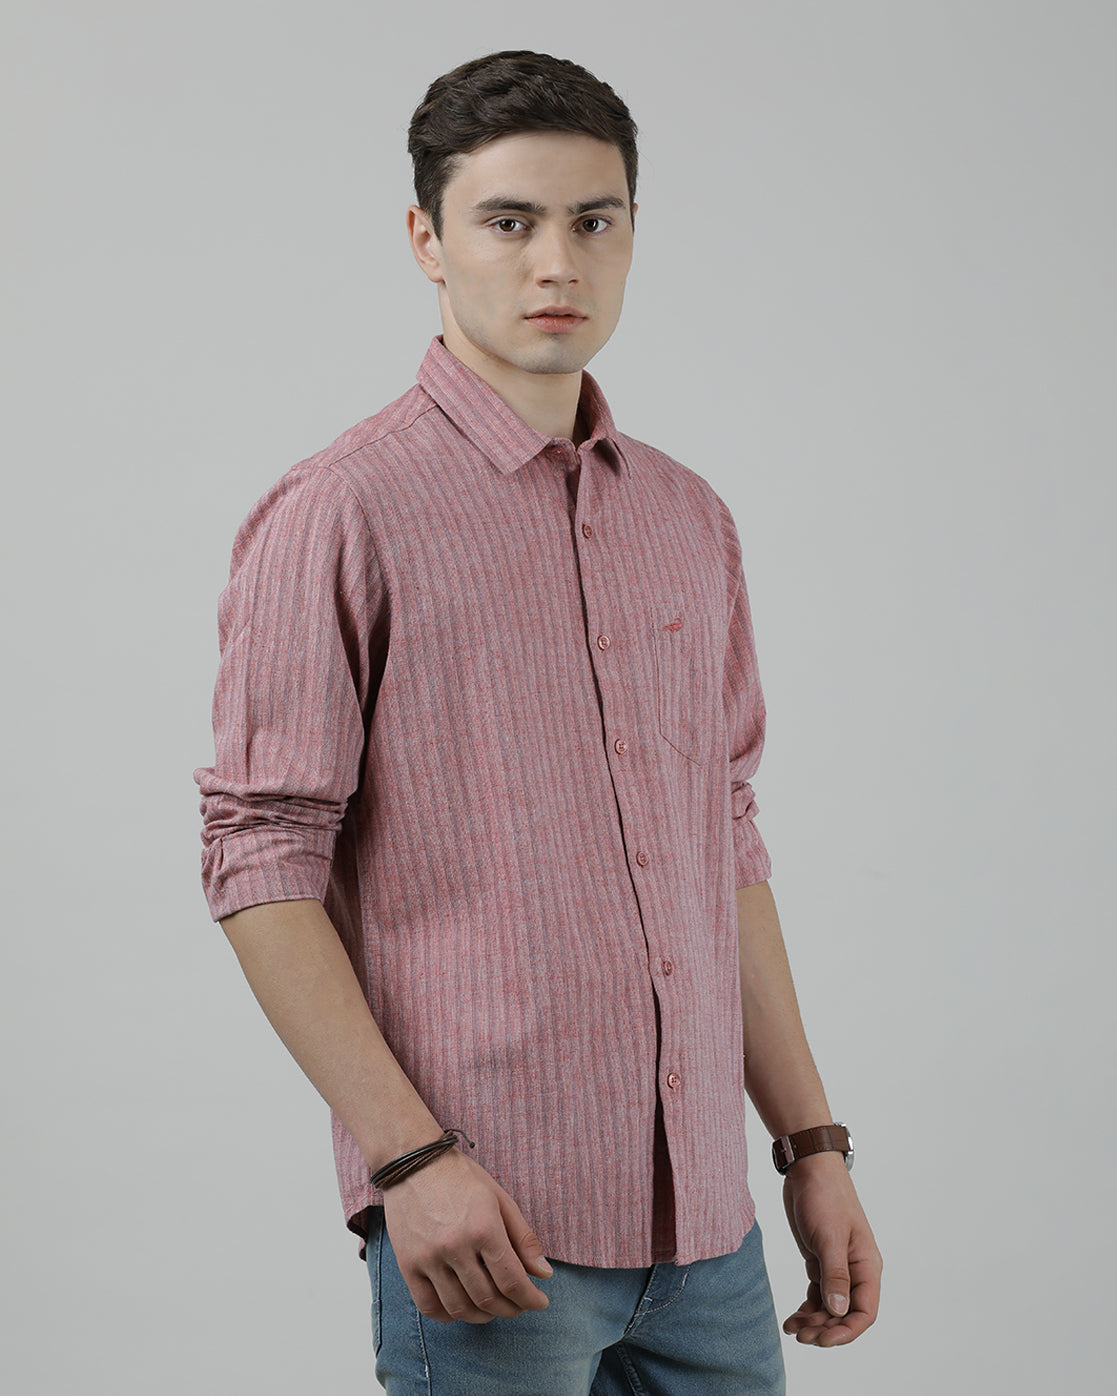 Casual Full Sleeve Comfort Fit Stripe Shirt Red for Men